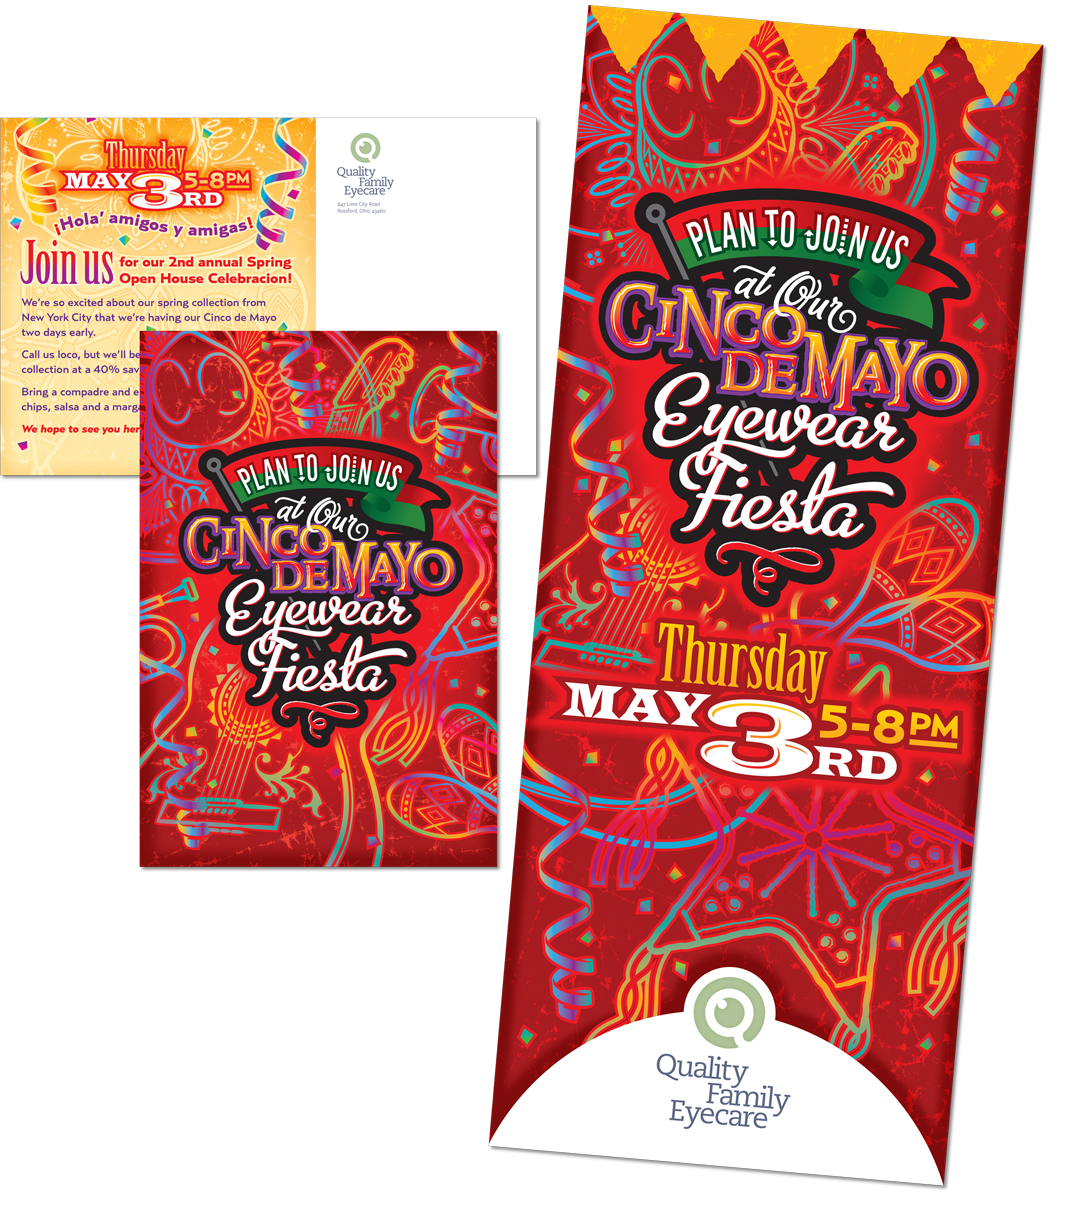 Series of postcards and in-store banners promoting themed trunk shows